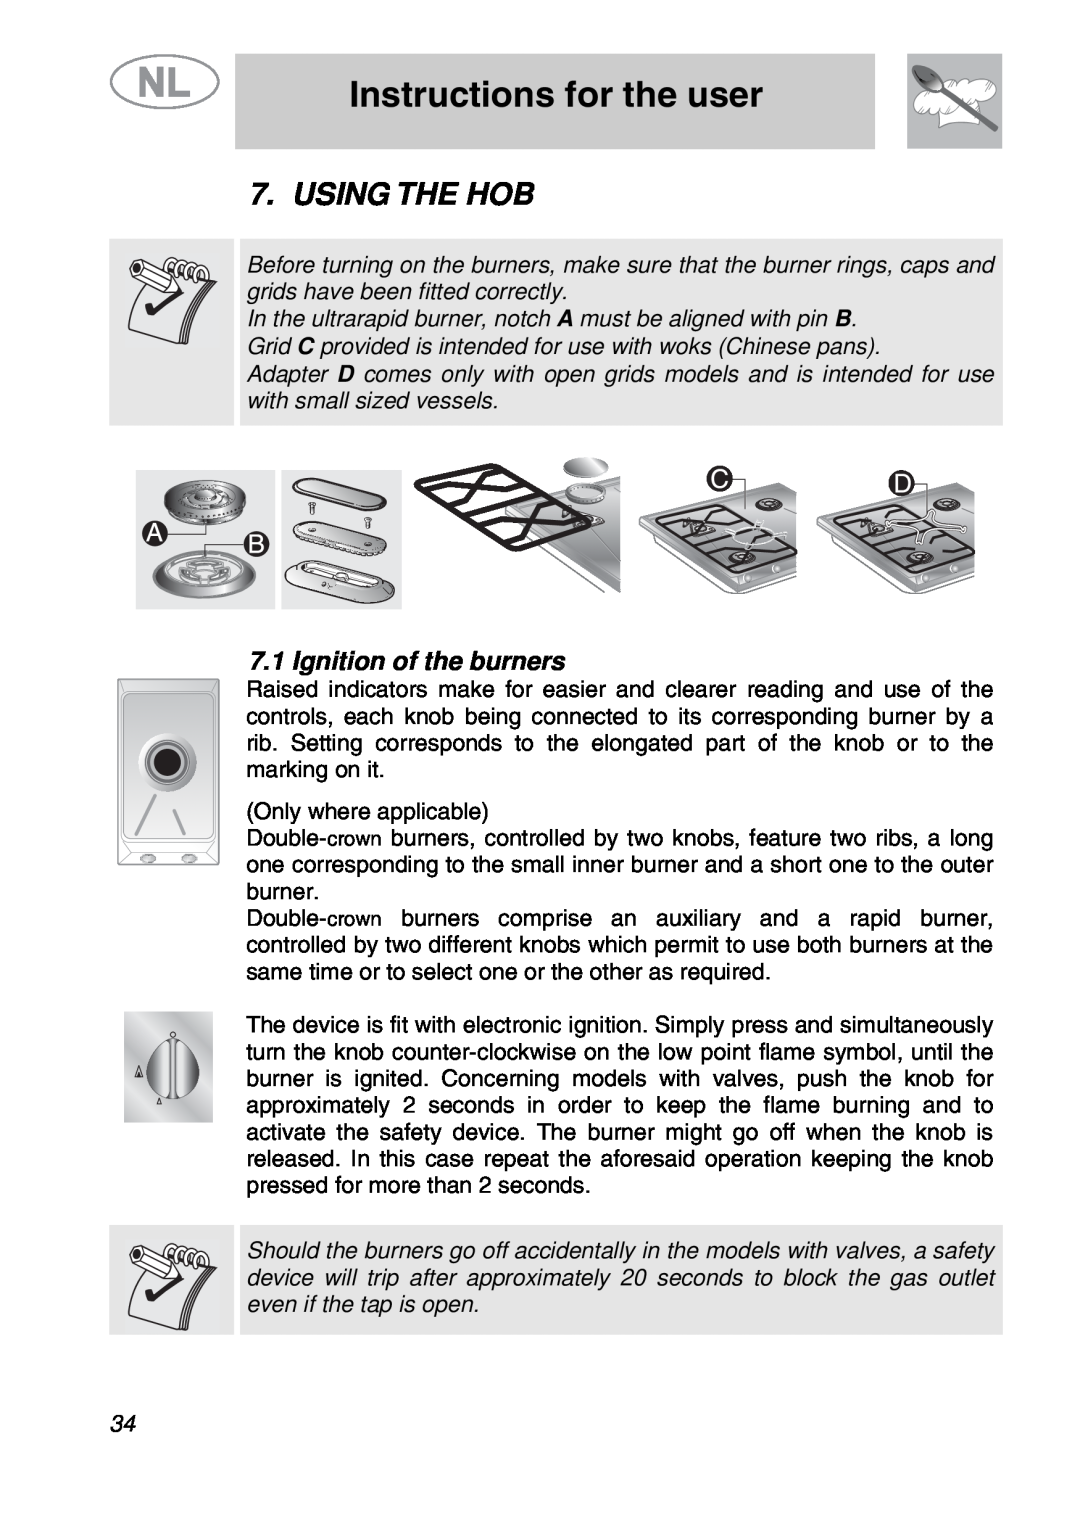 Smeg GKDCO15, GKCO64-3 manual Instructions for the user, Using The Hob 